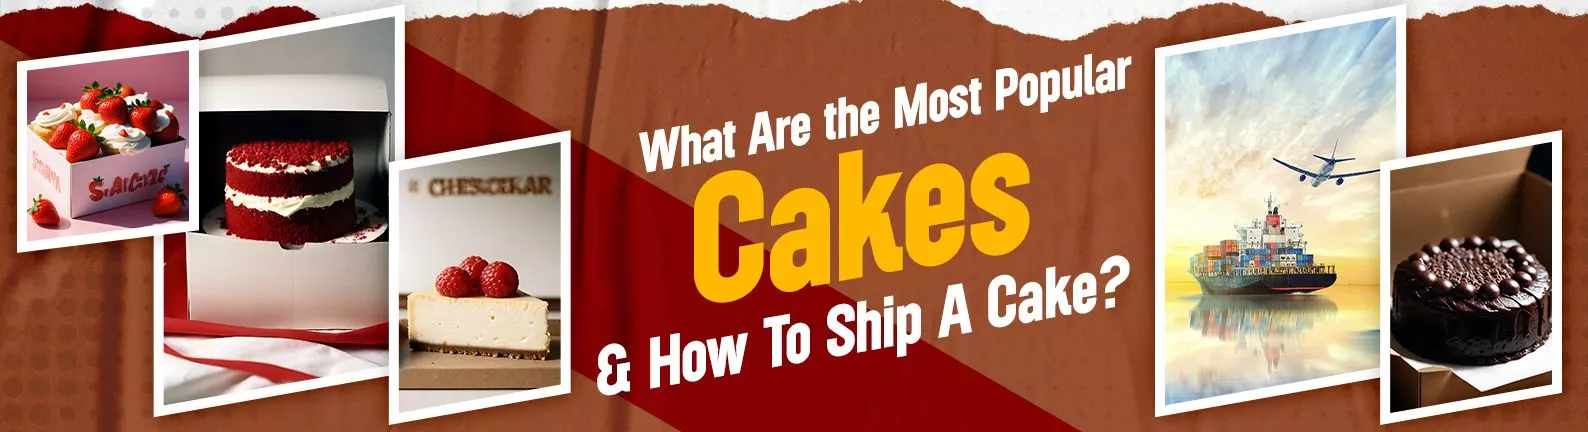 12 Most Popular Cakes and how to ship them